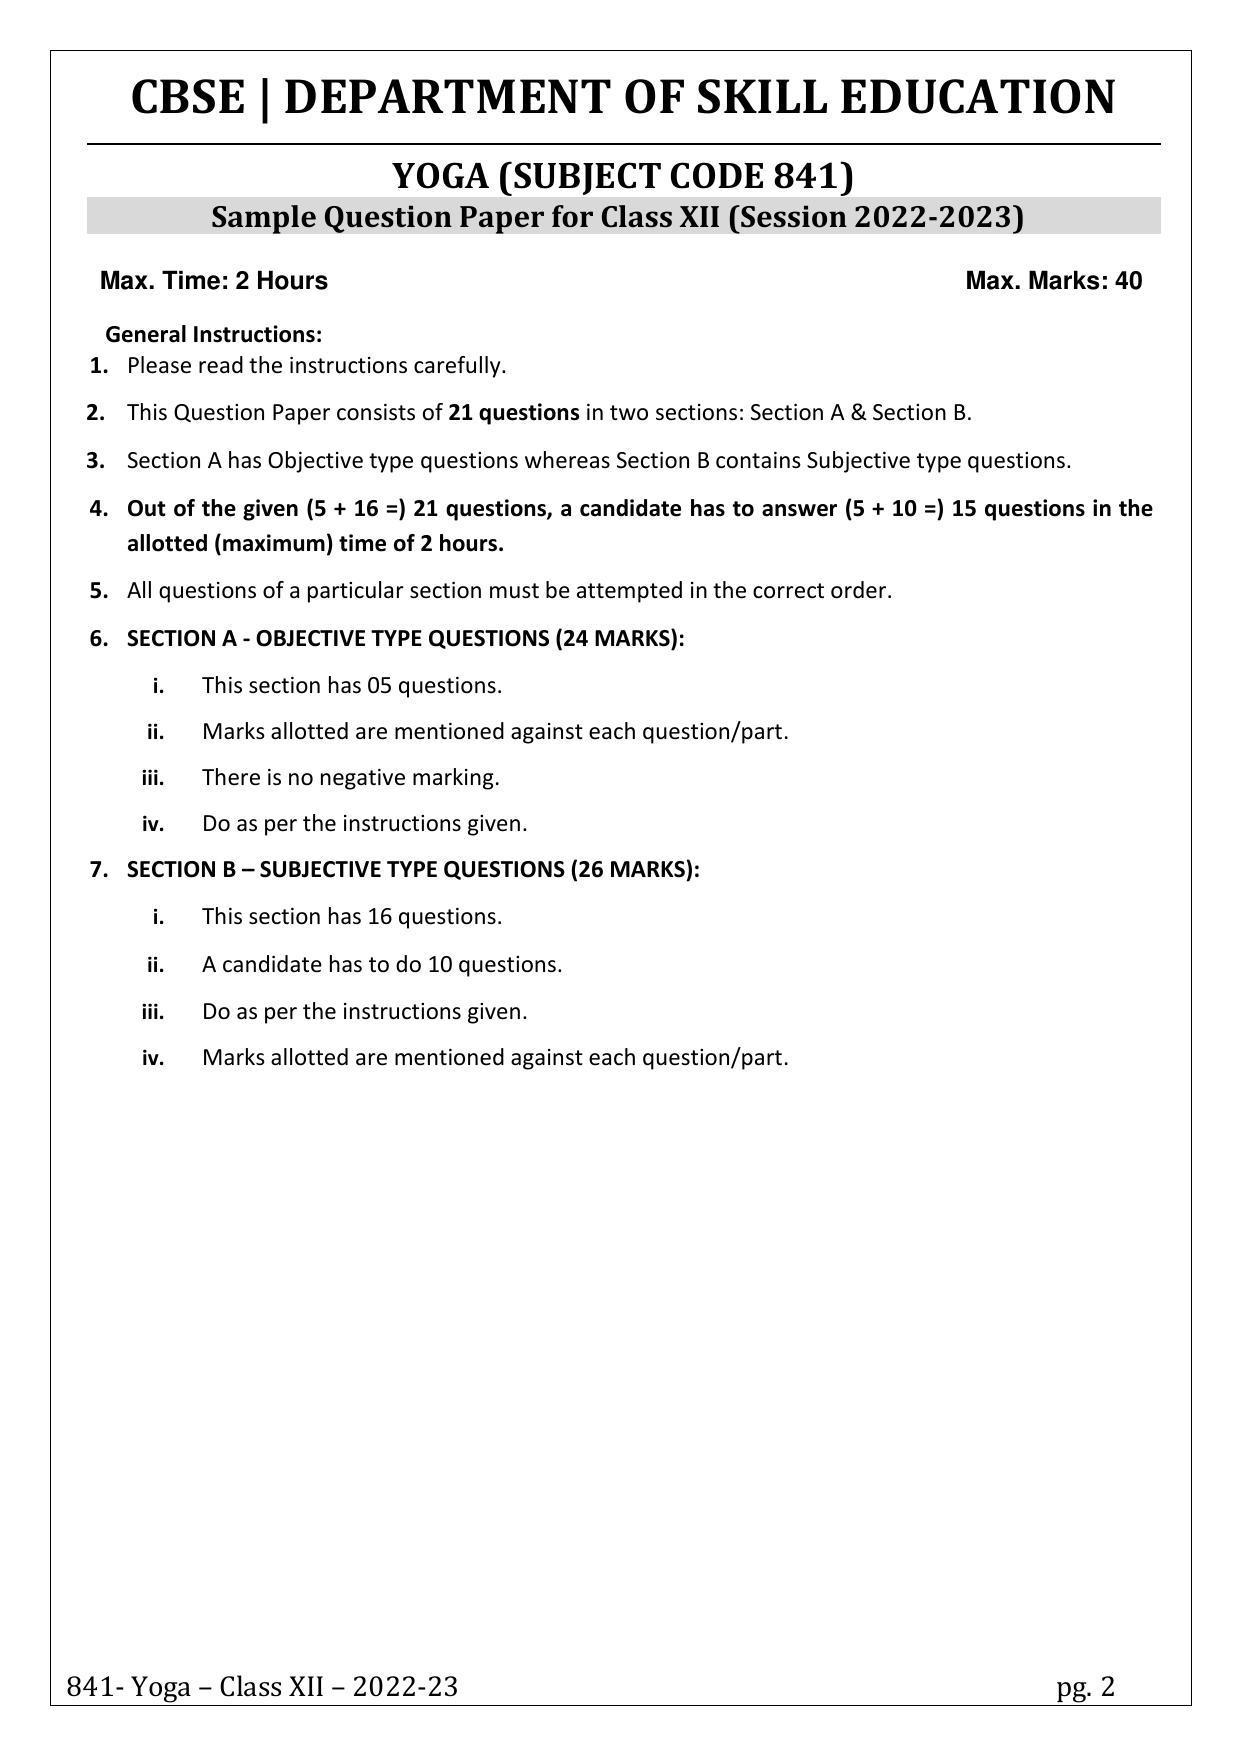 CBSE Class 12 Yoga (Skill Education) Sample Papers 2023 - Page 2